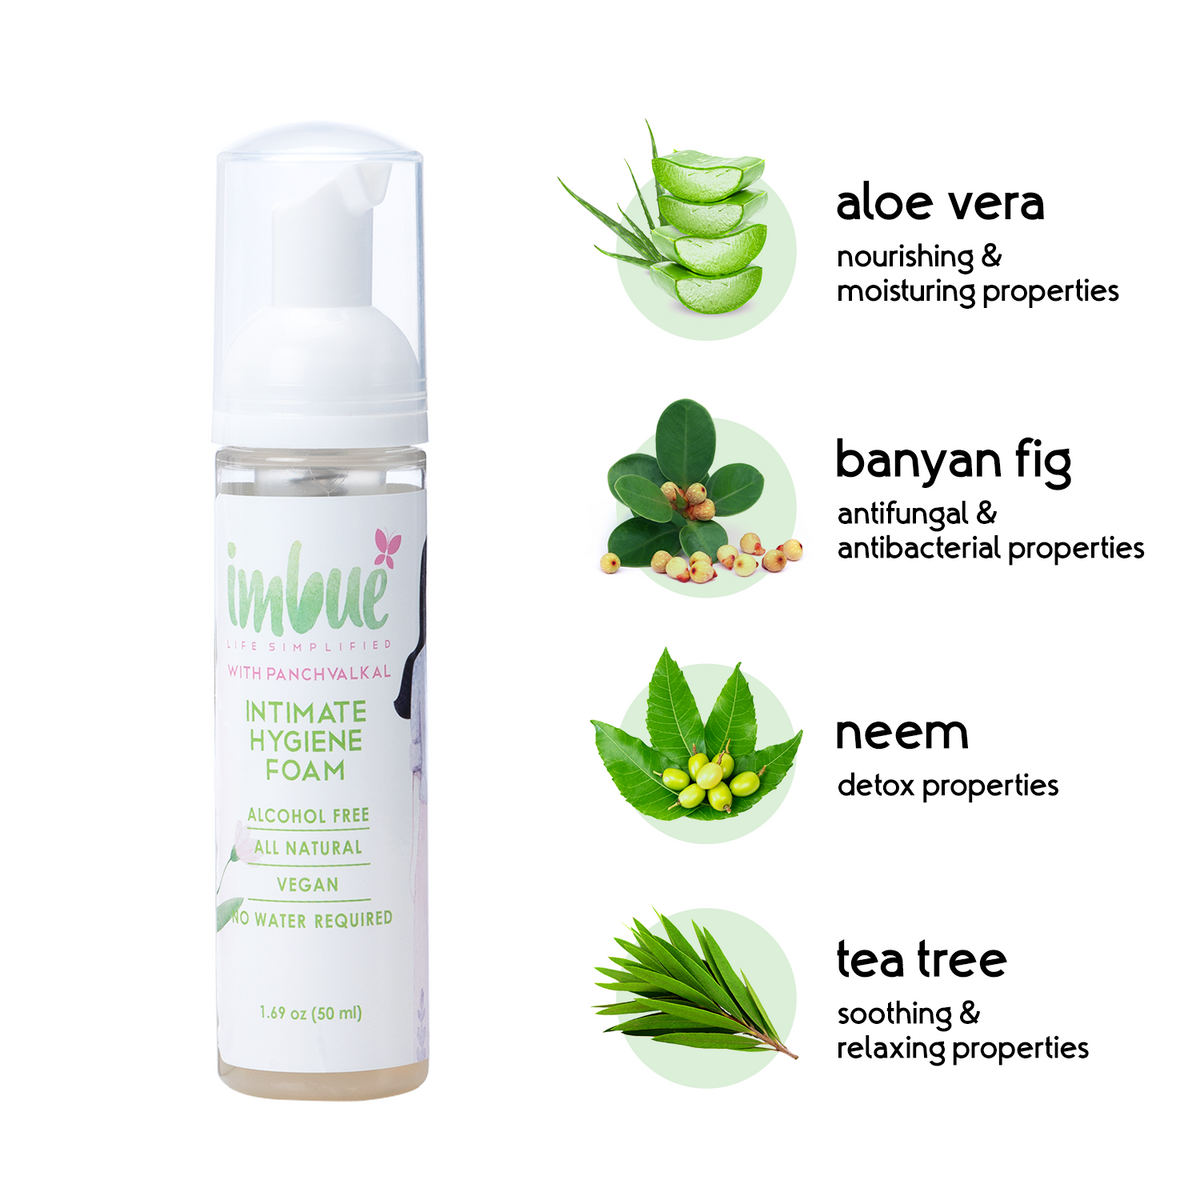 Imbue Natural Intimate Hygiene Foam & Firefly For Women Combo